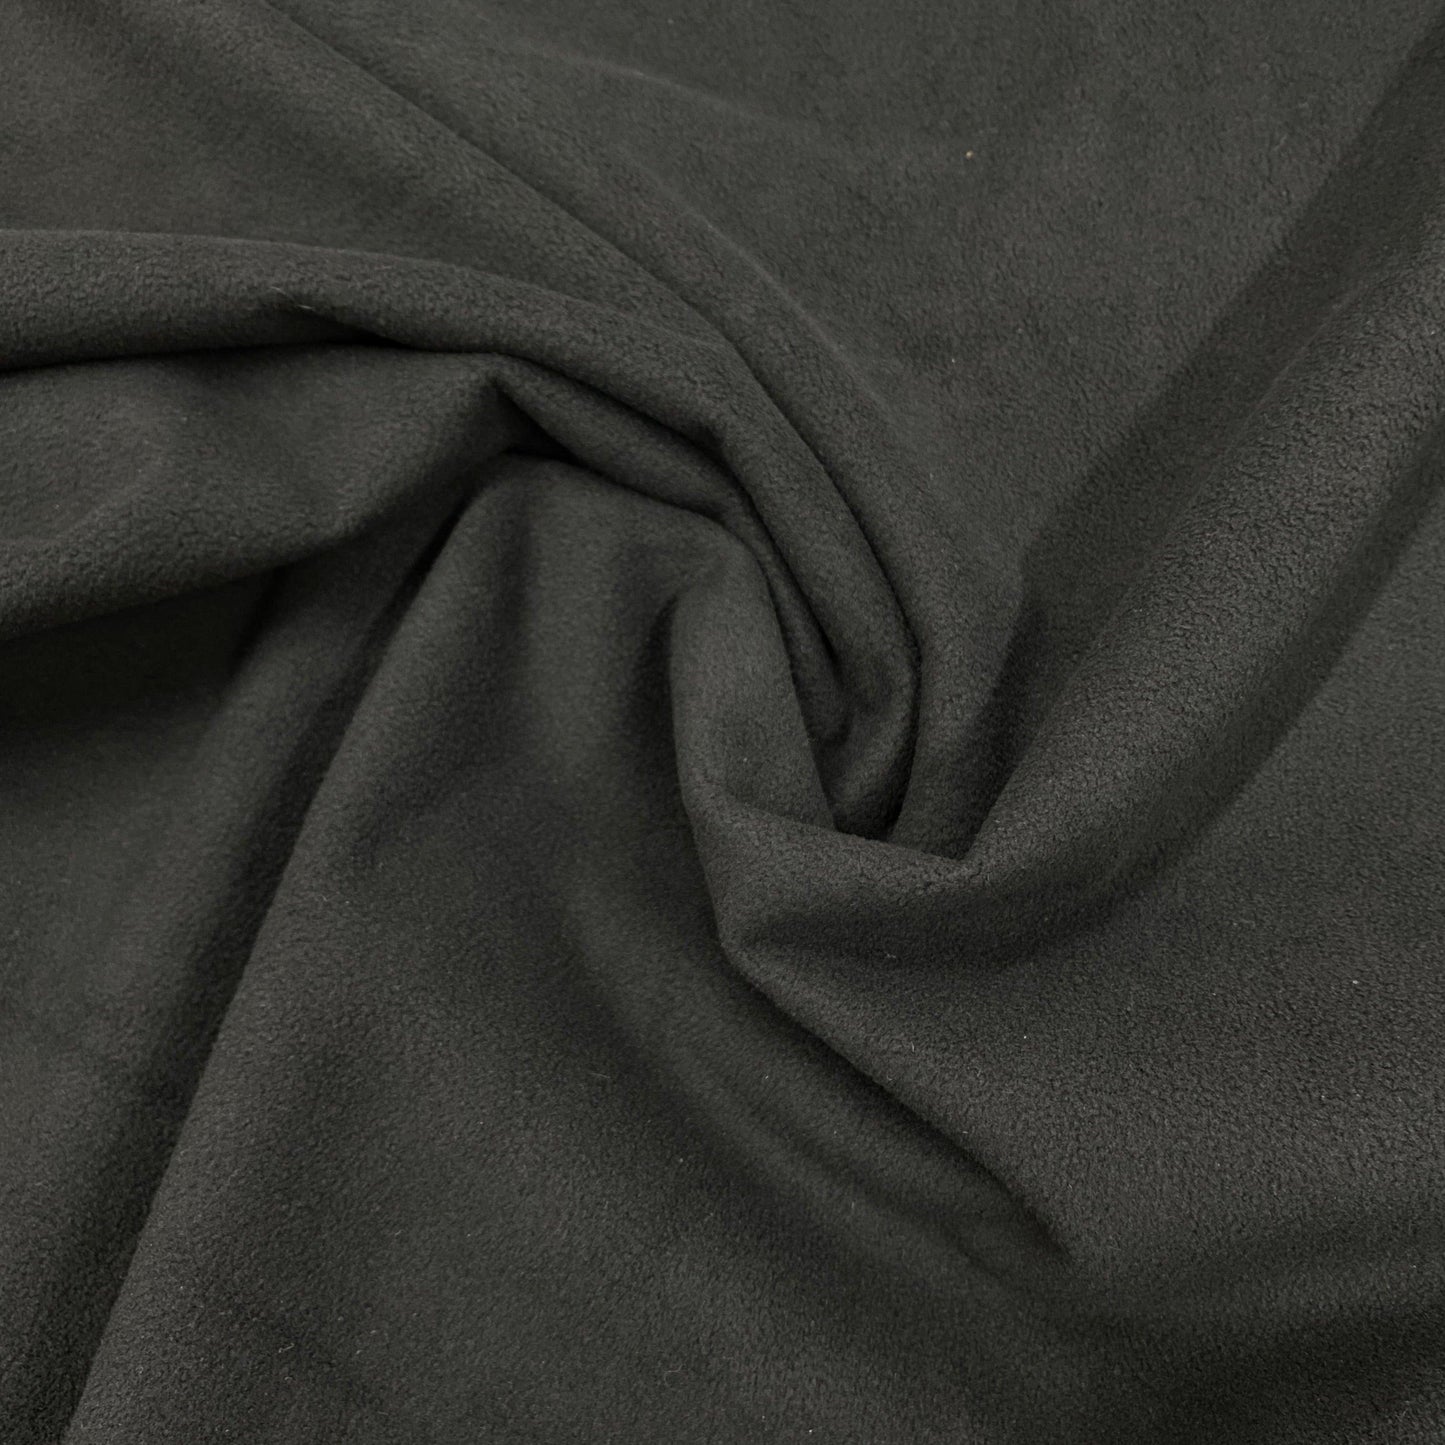 Moroccan and Black Softshell Fabric - Two Sides - Nature's Fabrics